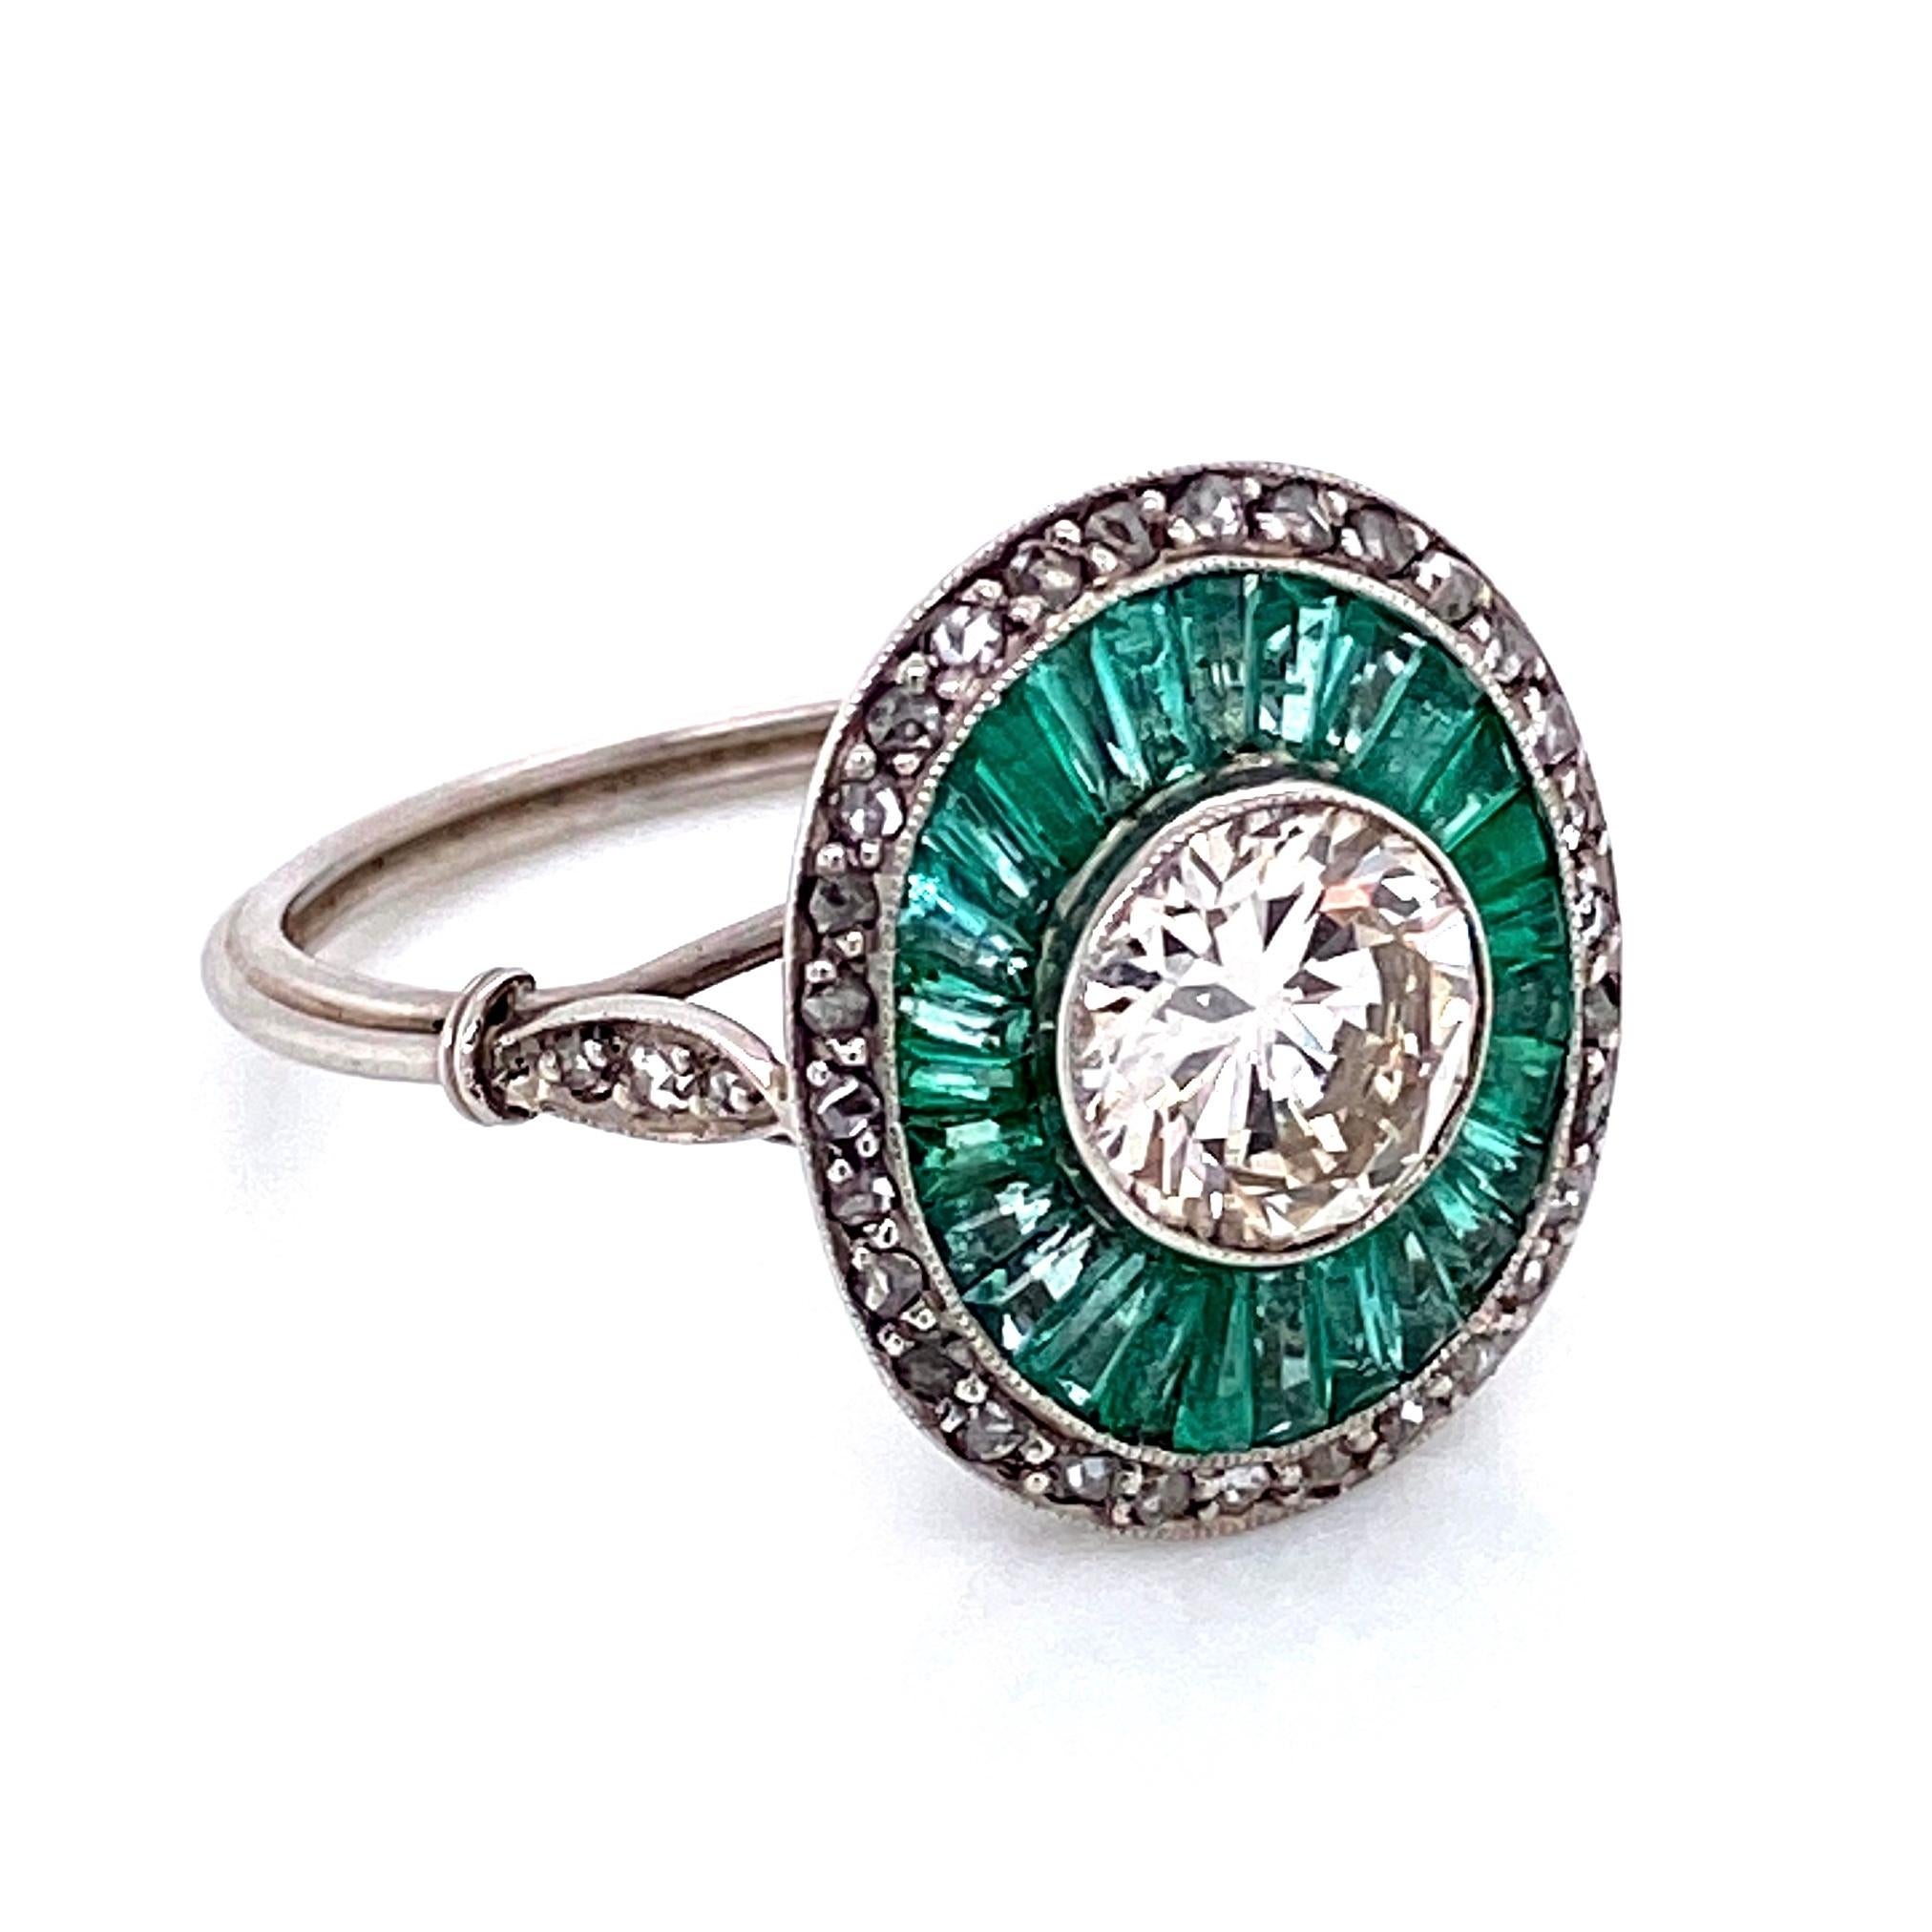 Beautiful Solitaire Cocktail Platinum ring. The center securely set with a 7mm Transitional cut diamond, weighing approx. 1.35 carat; surrounded by long light emerald baguettes approx. 1.50 total carat weight and 0.36tcw side diamonds. Handmade